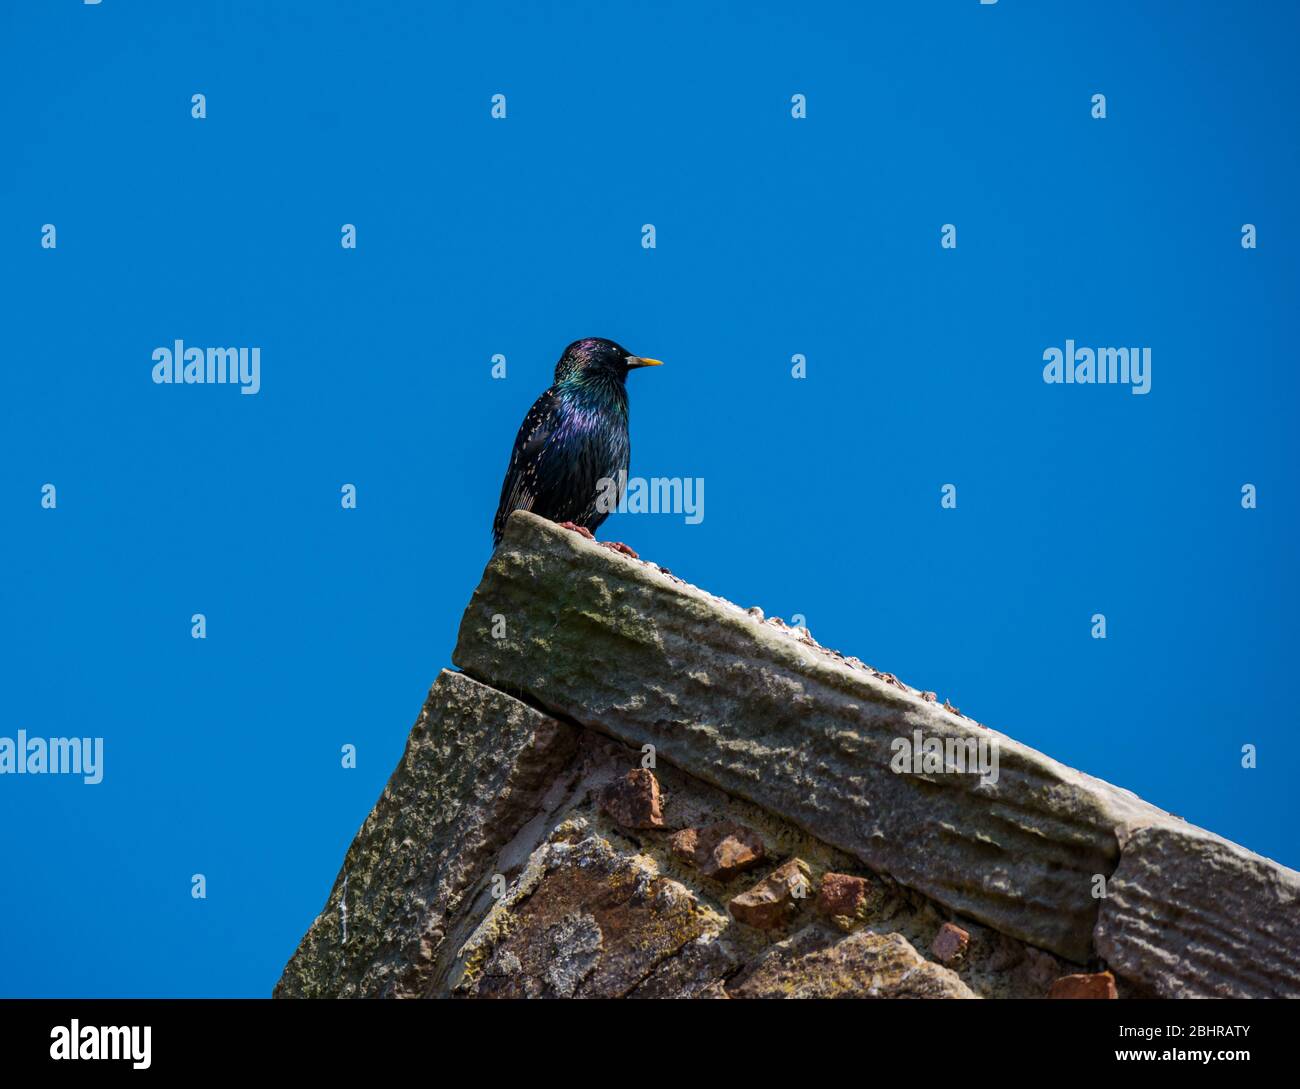 Glossy starling, Sturnus vulgaris, perched on gable roof with blue sky, Scotland, UK Stock Photo